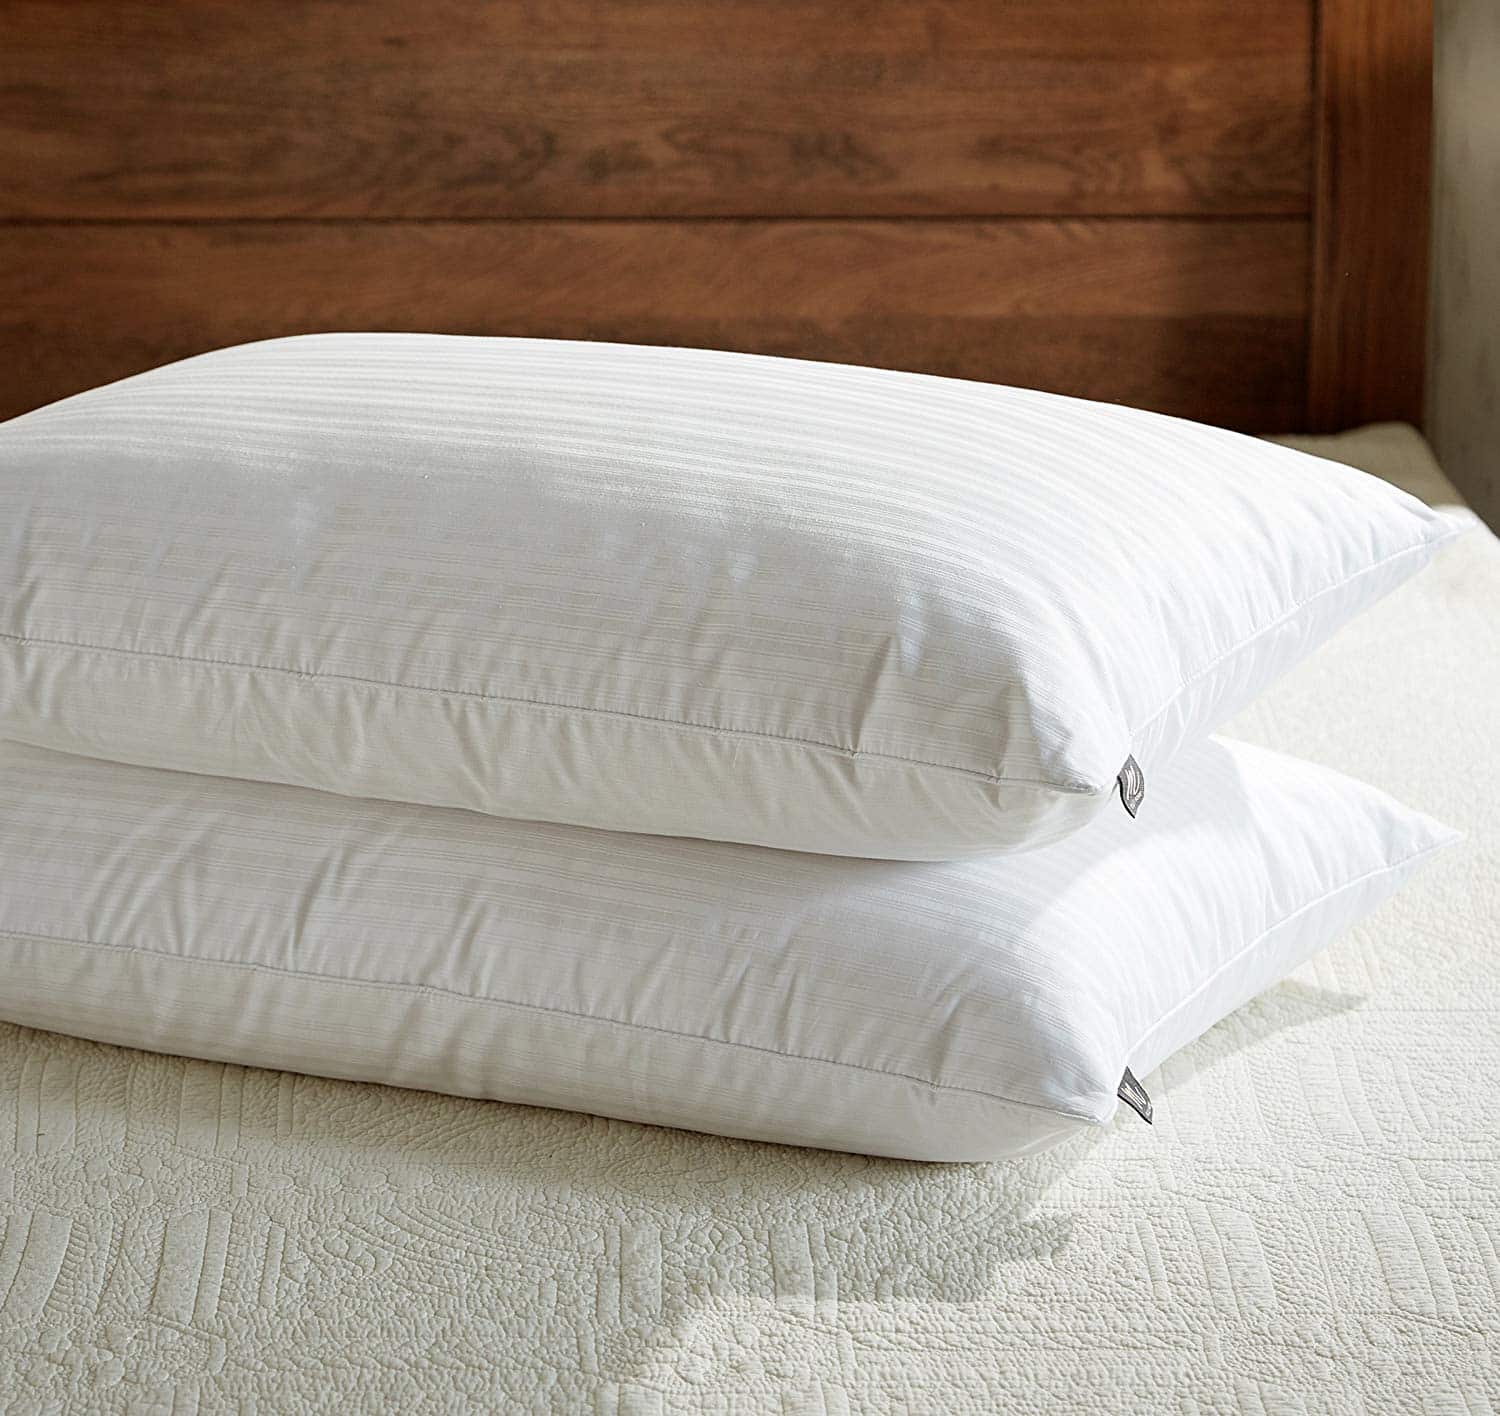 Top 10 Best Down Pillows Standard in 2023 Complete Reviews